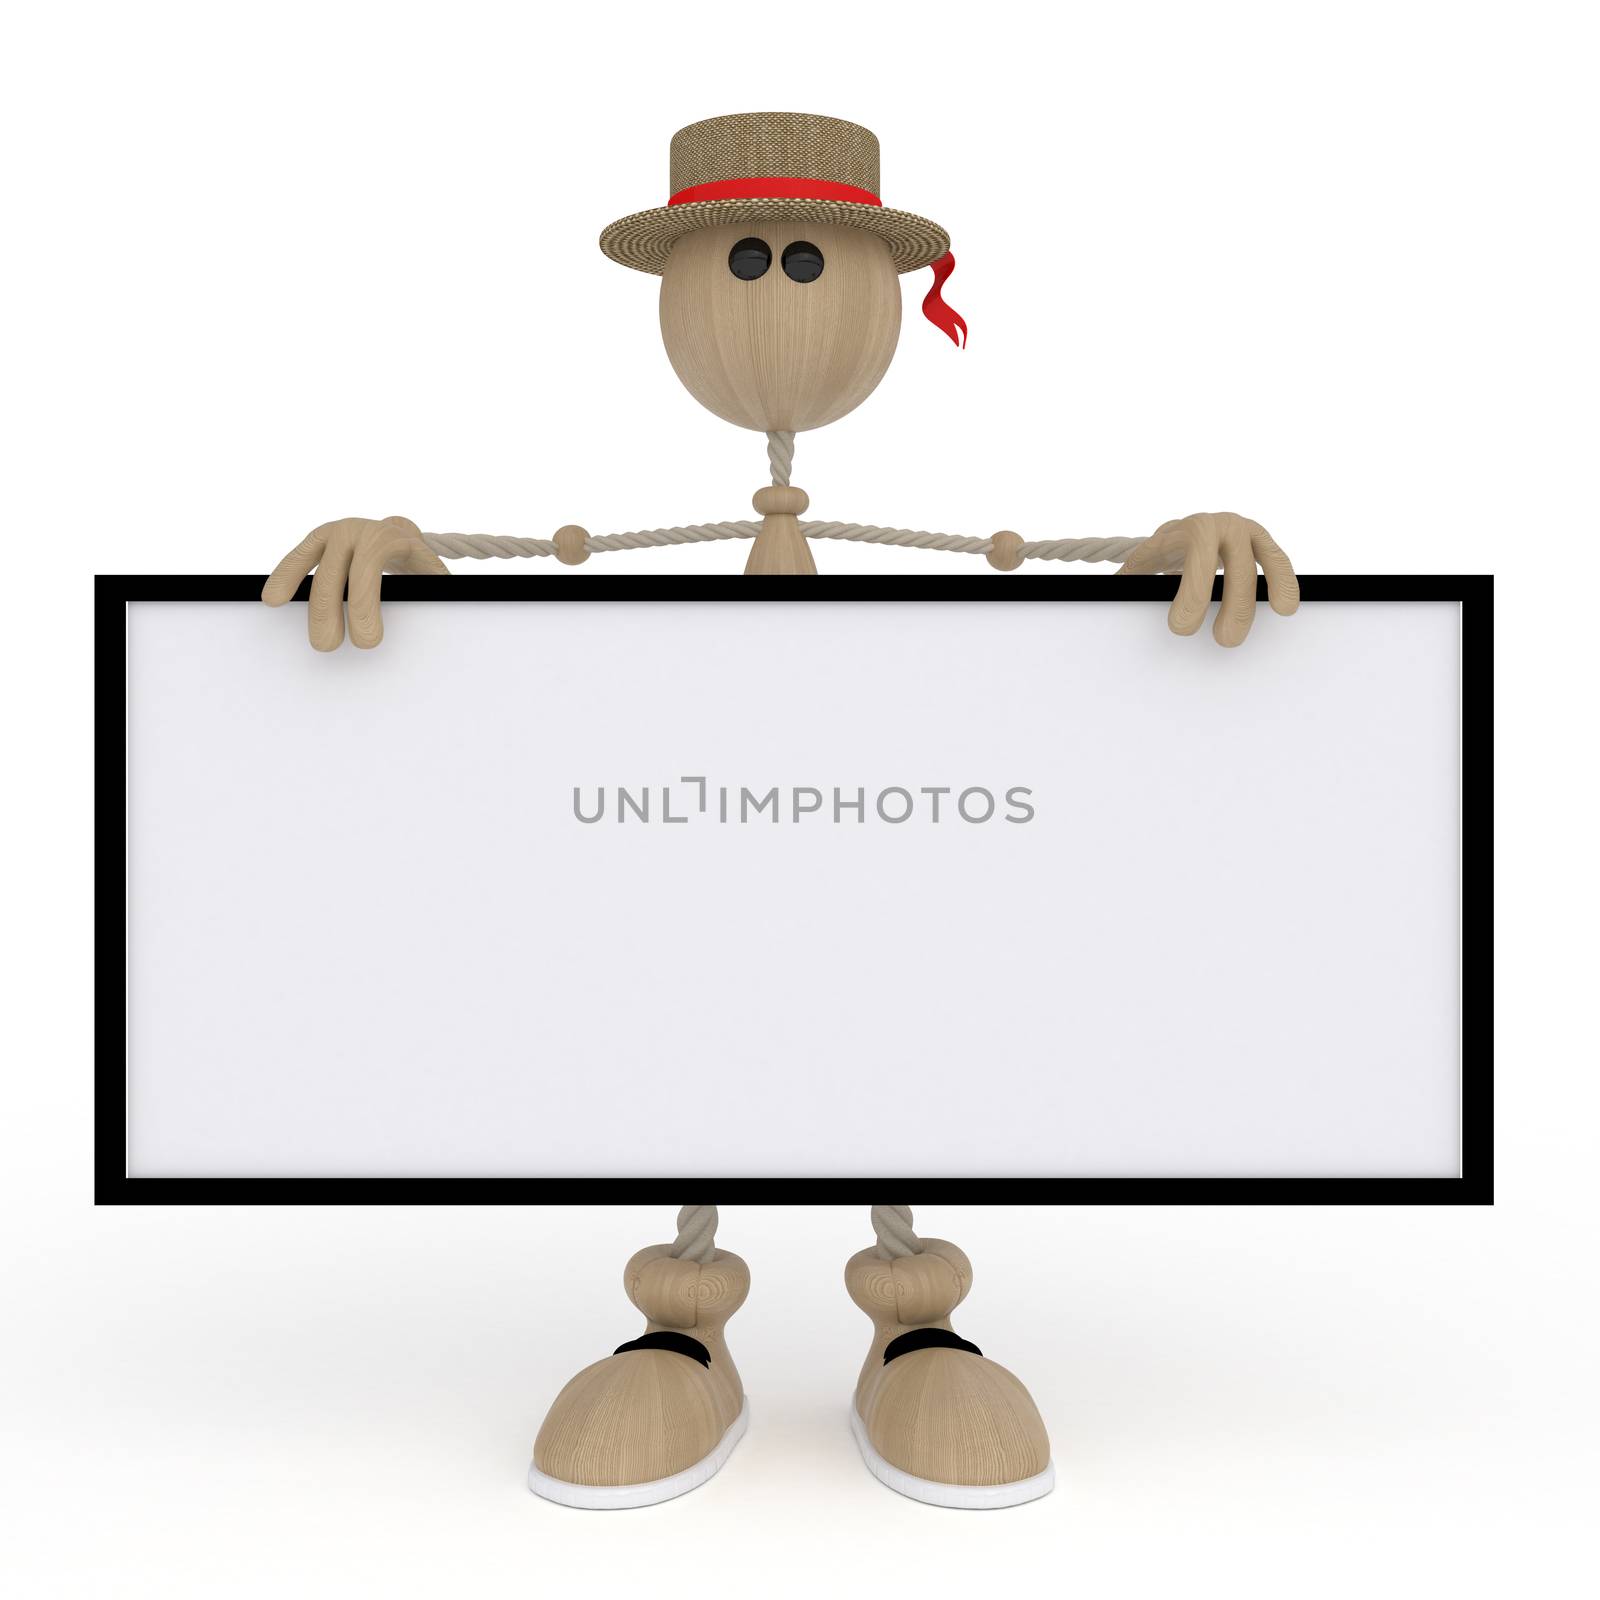 The wooden character holds a billboard.